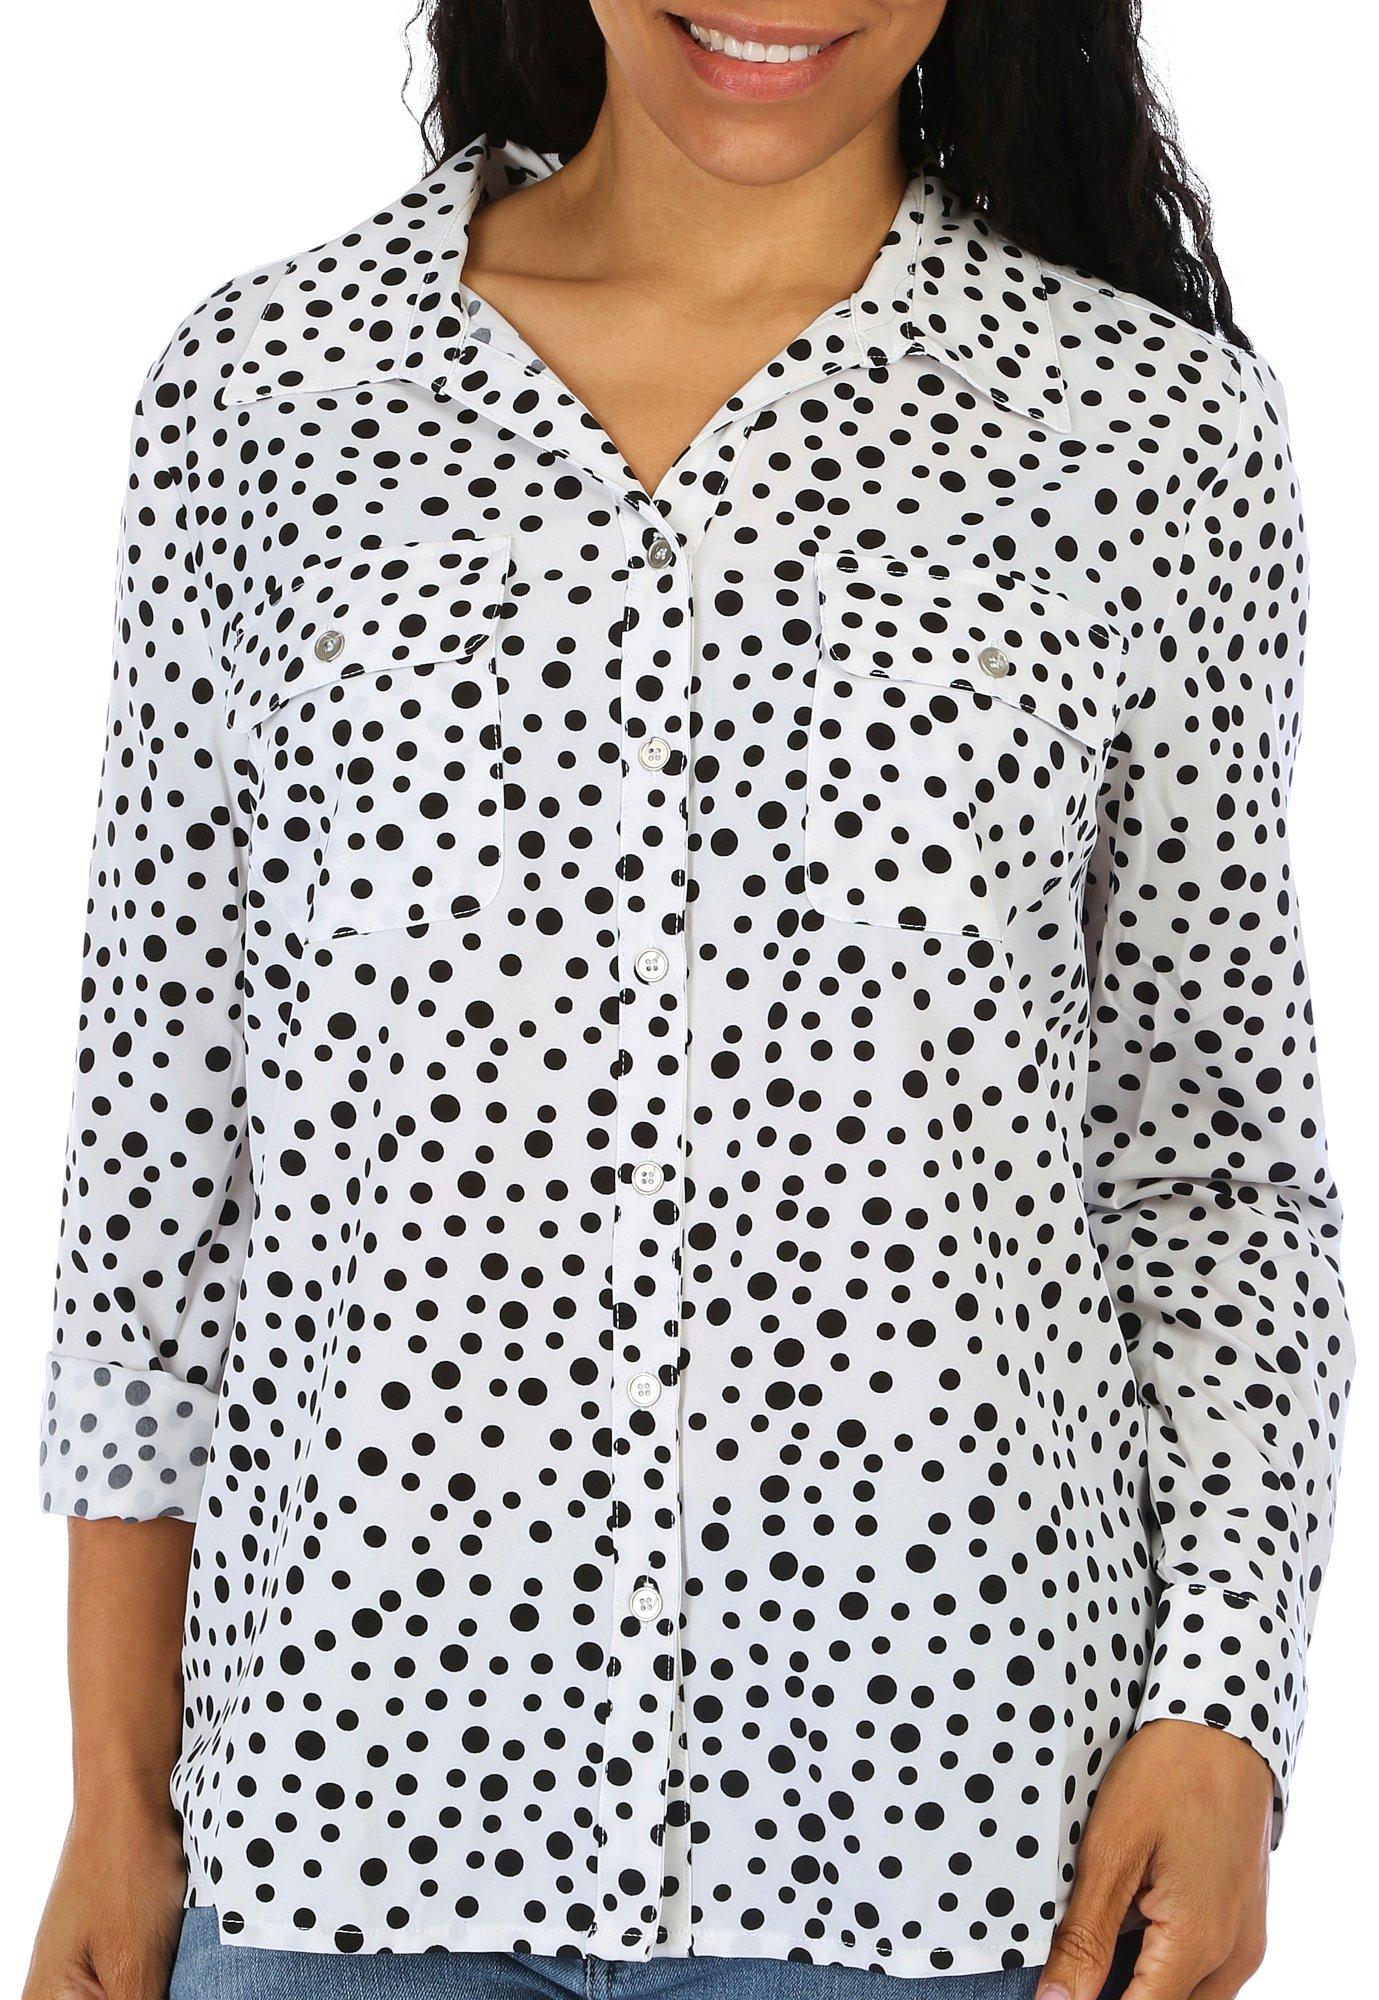 Juniper + Lime Womens Dots 3/4 Sleeve Silky Stretch Top